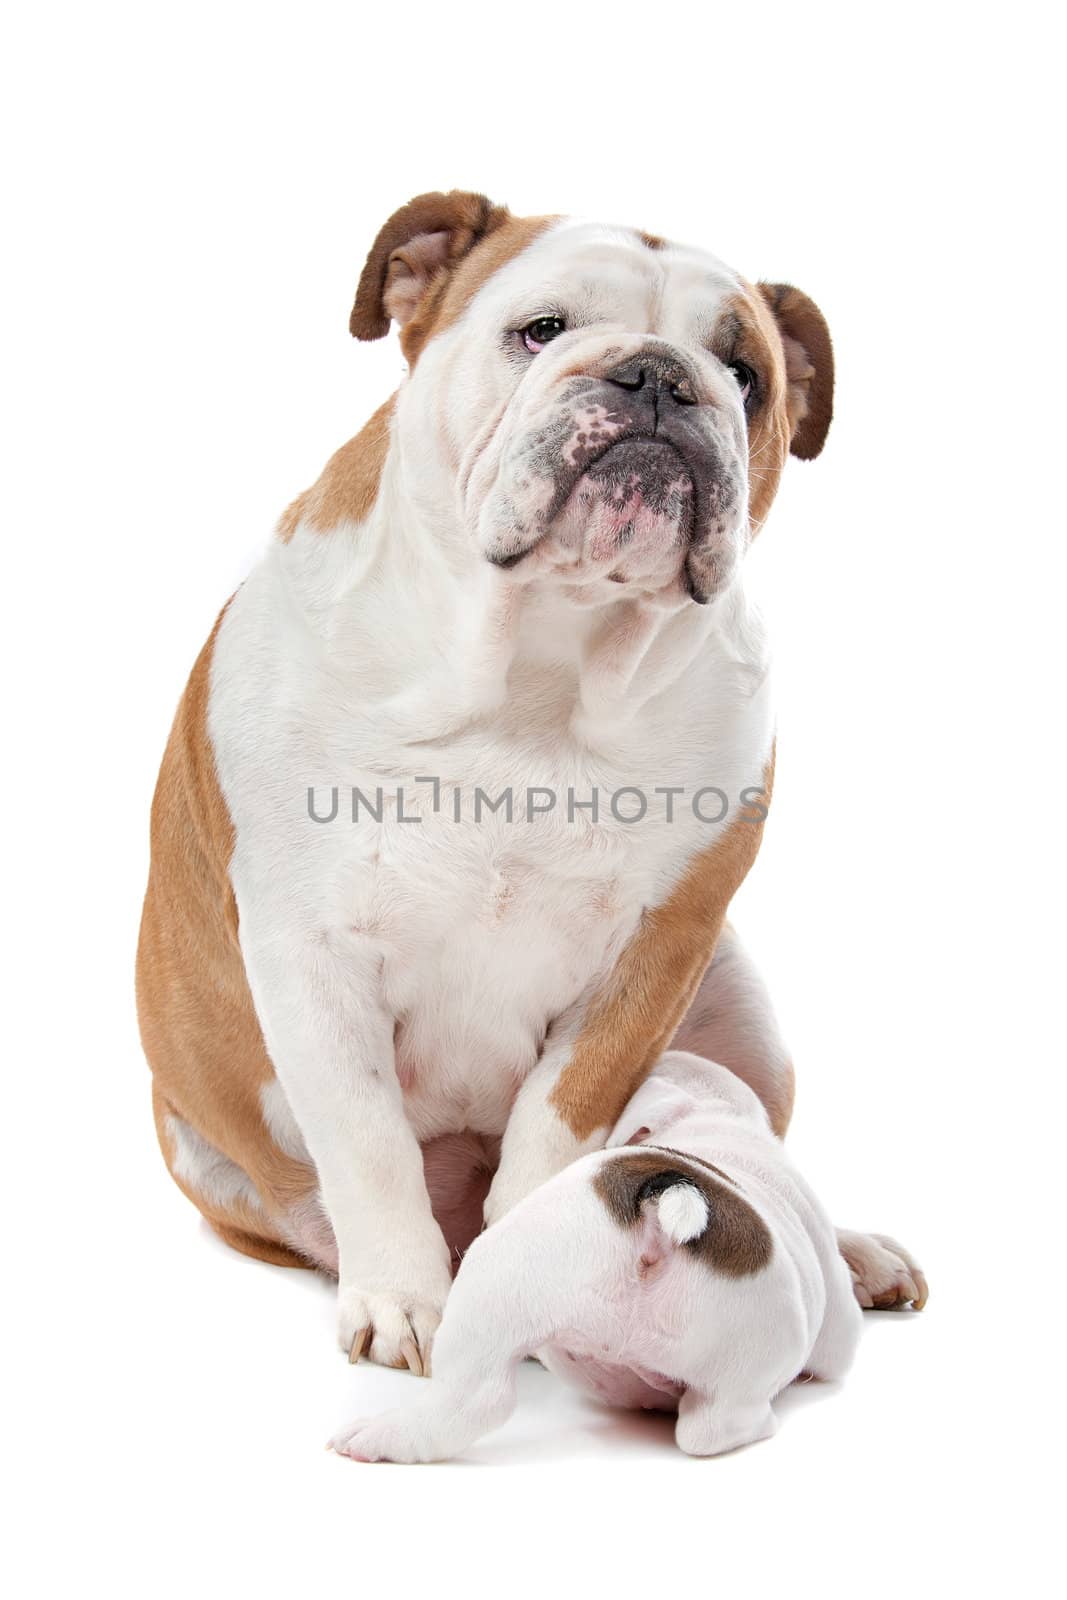 puppies drinking milk from mother dog in front of a white background